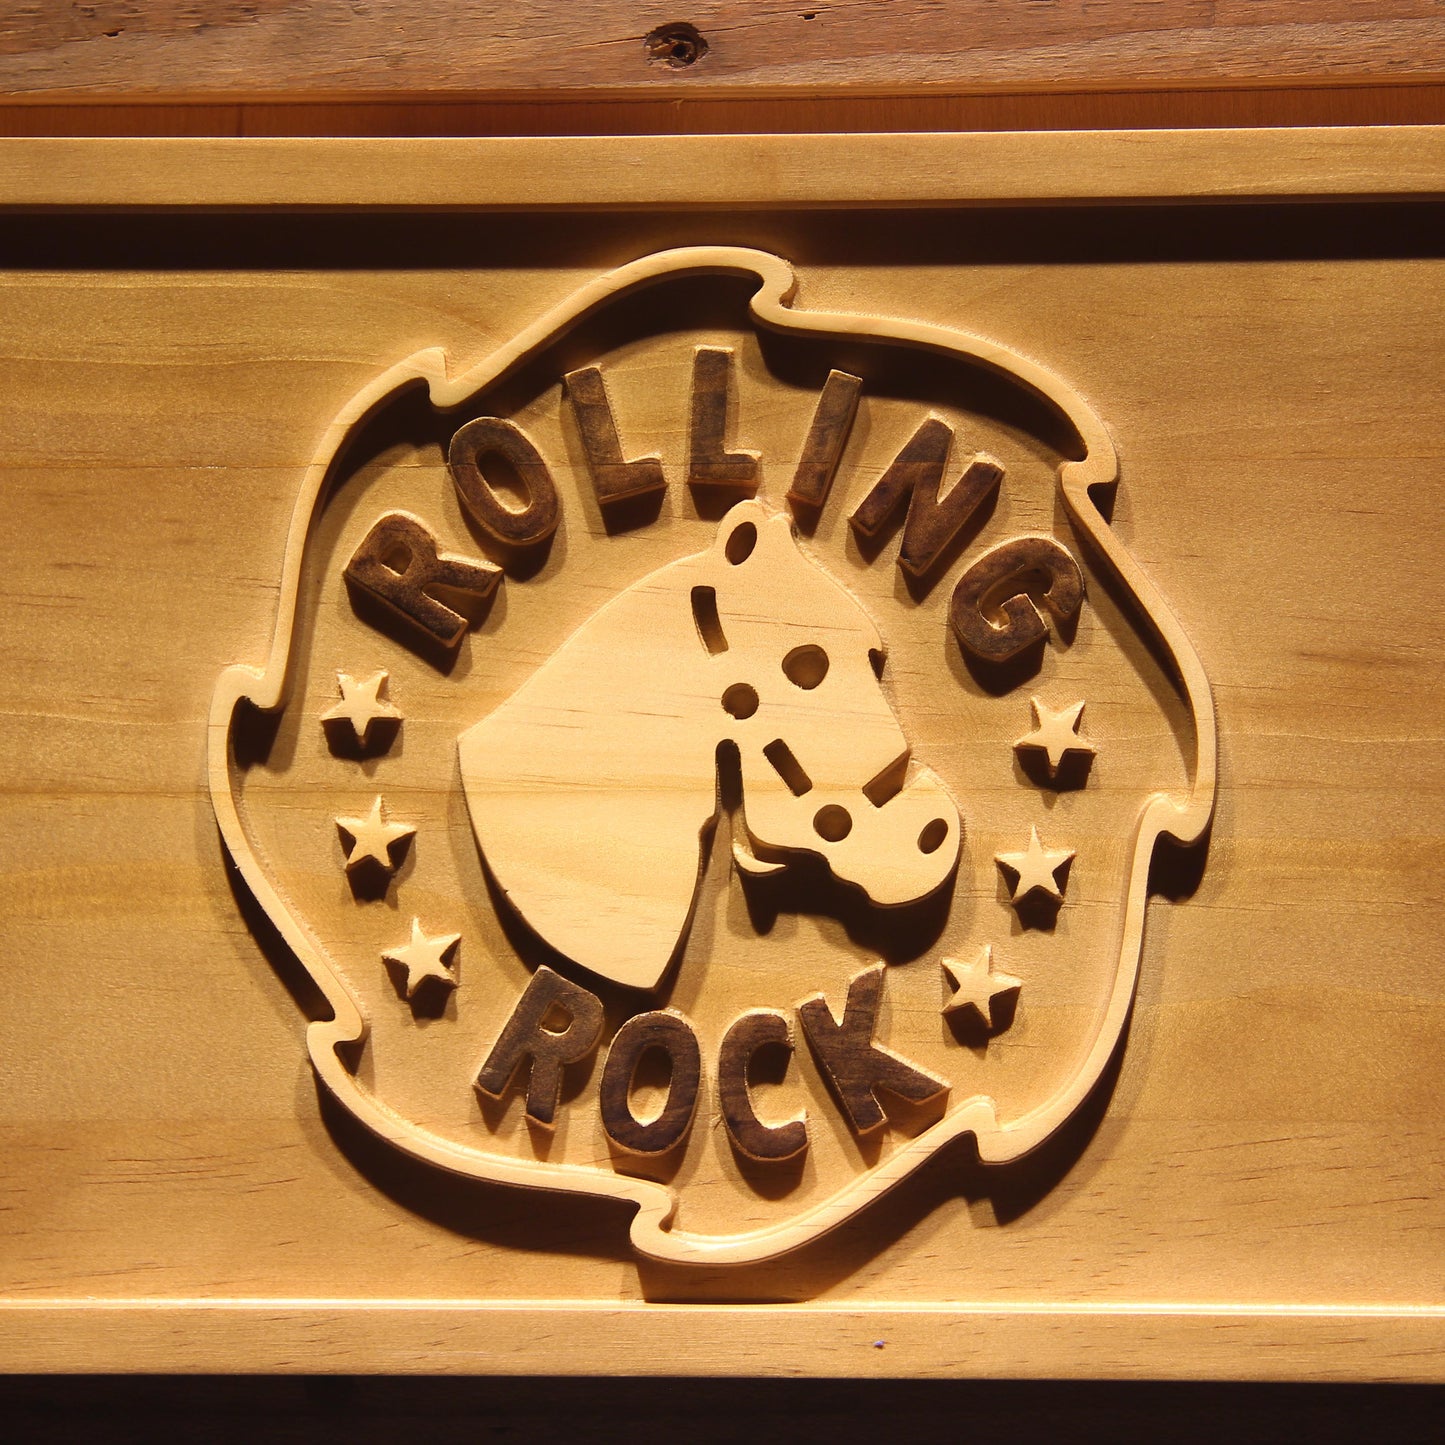 Rolling Rock  3D Wooden Bar Signs by Woody Signs Co. - Handmade Crafted Unique Wooden Creative